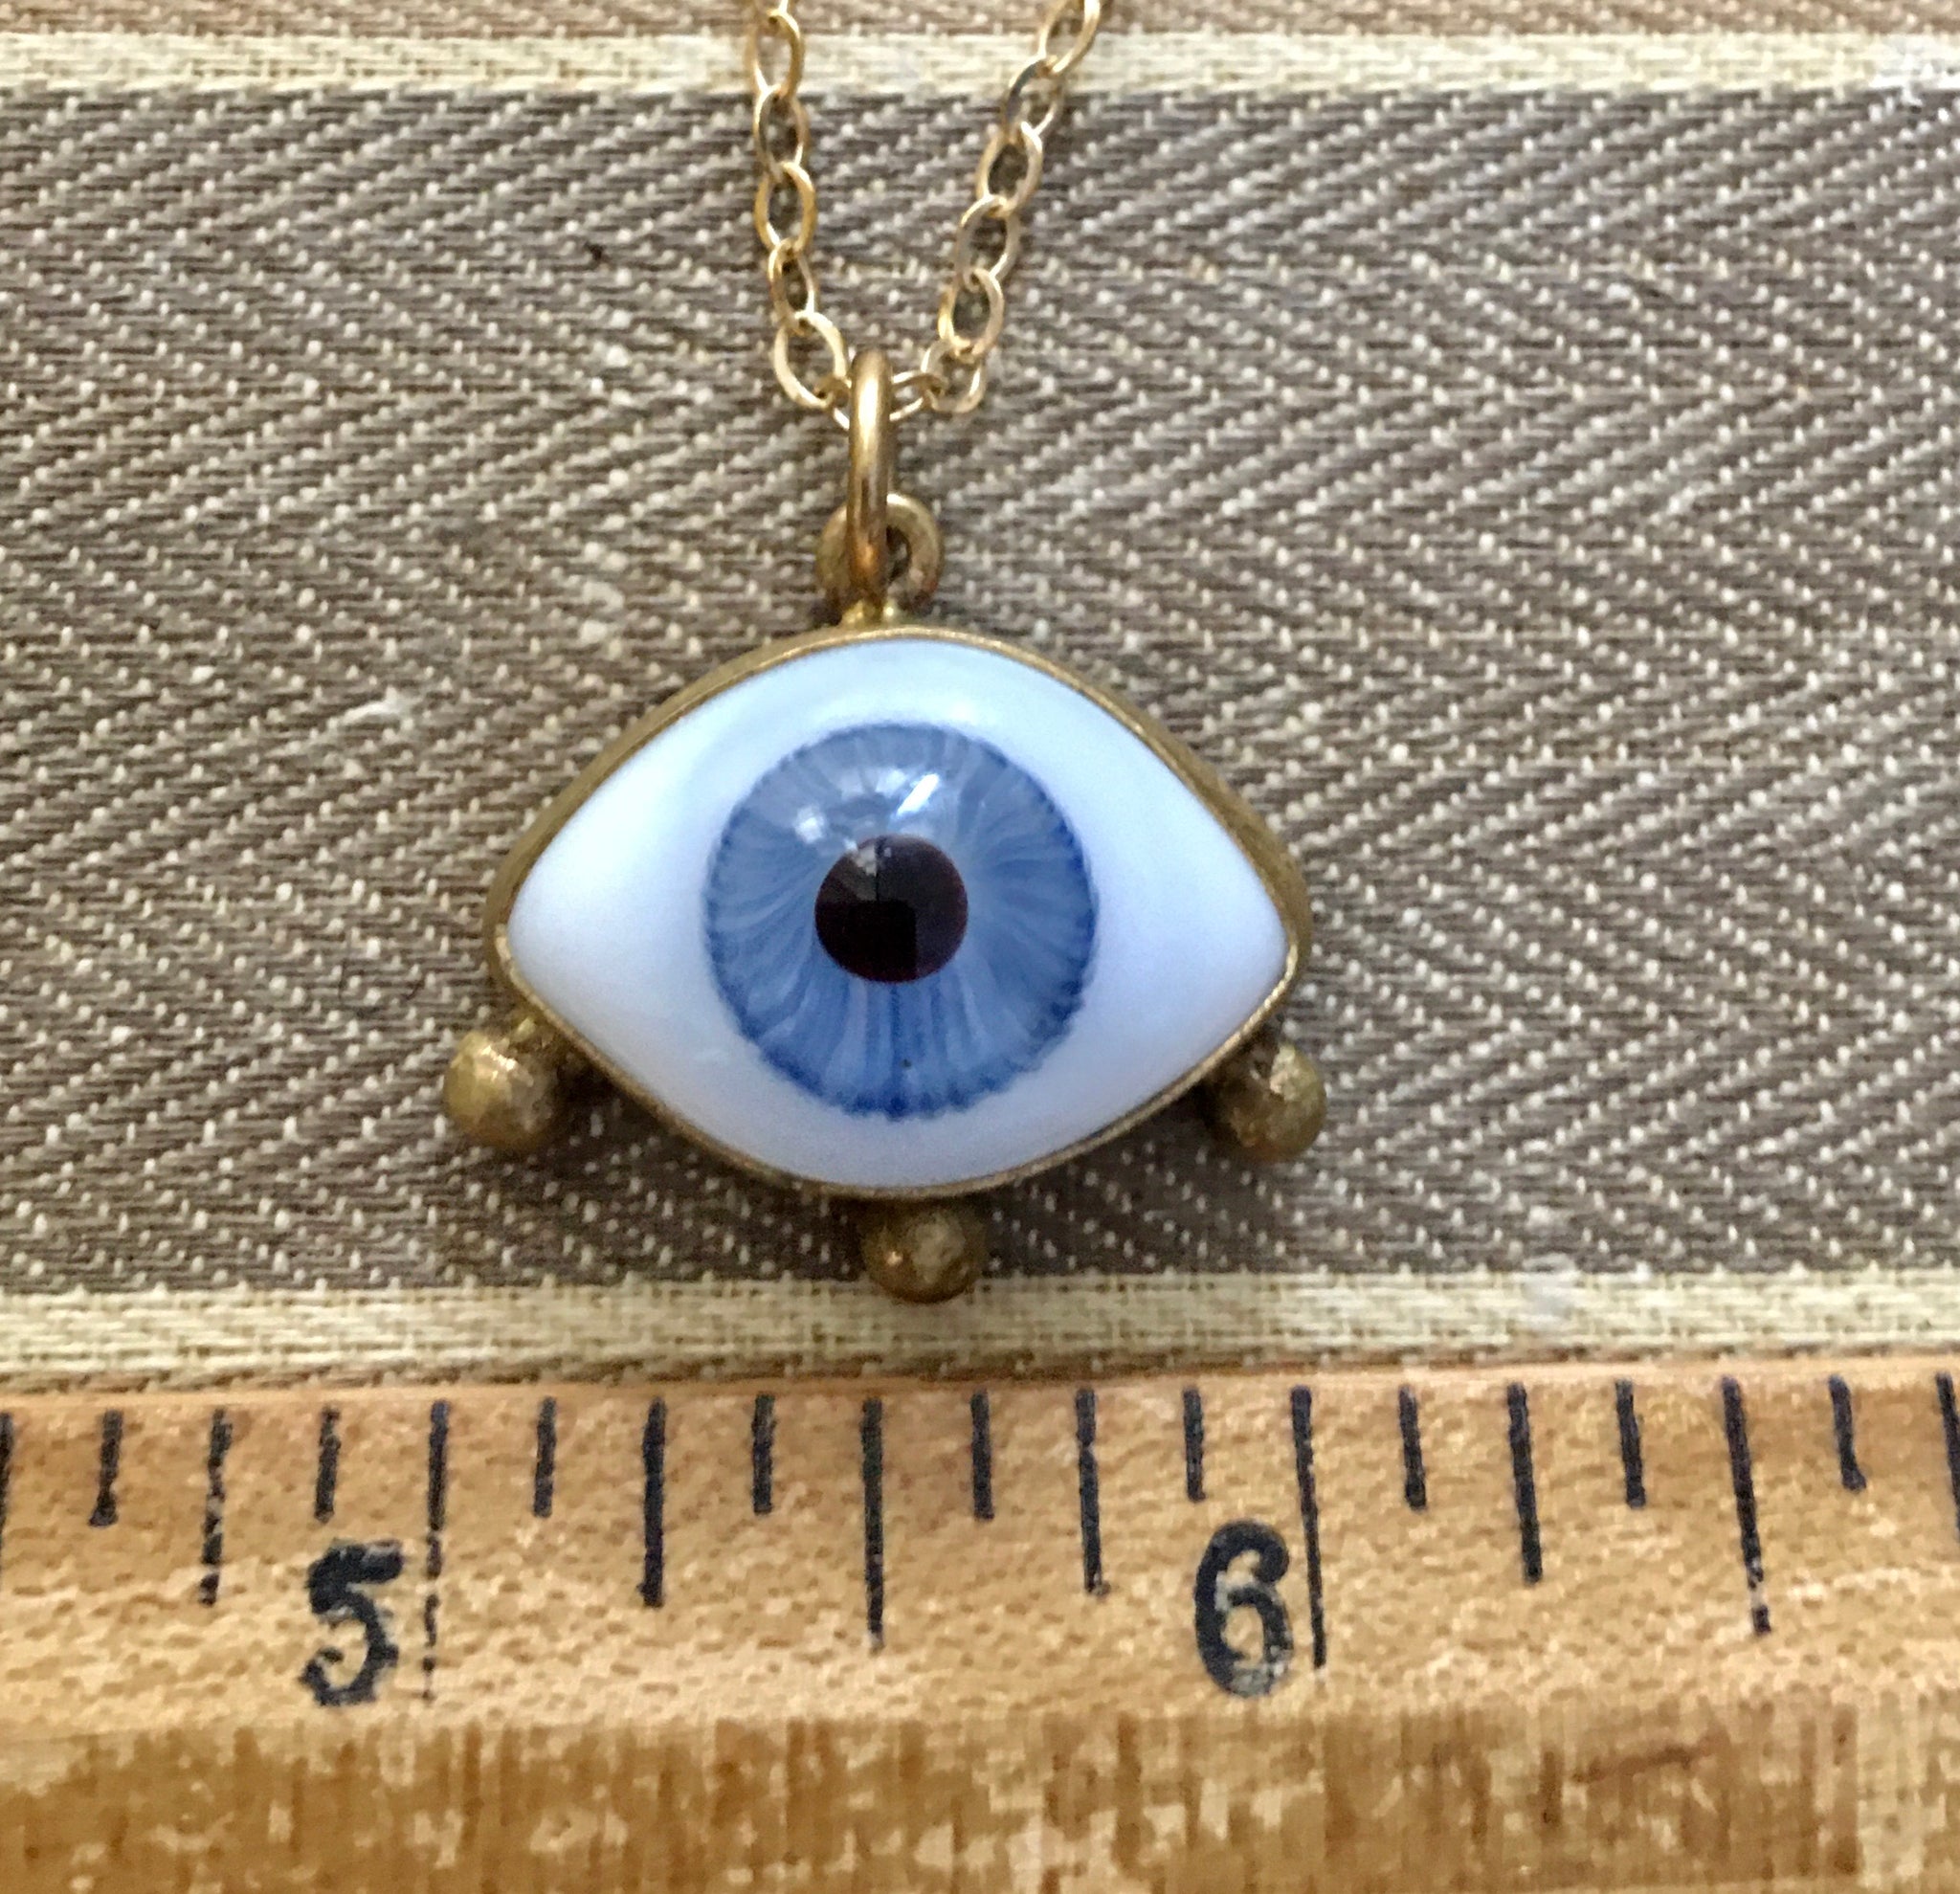 Blue eye charm with lashes on a 16” brass chain